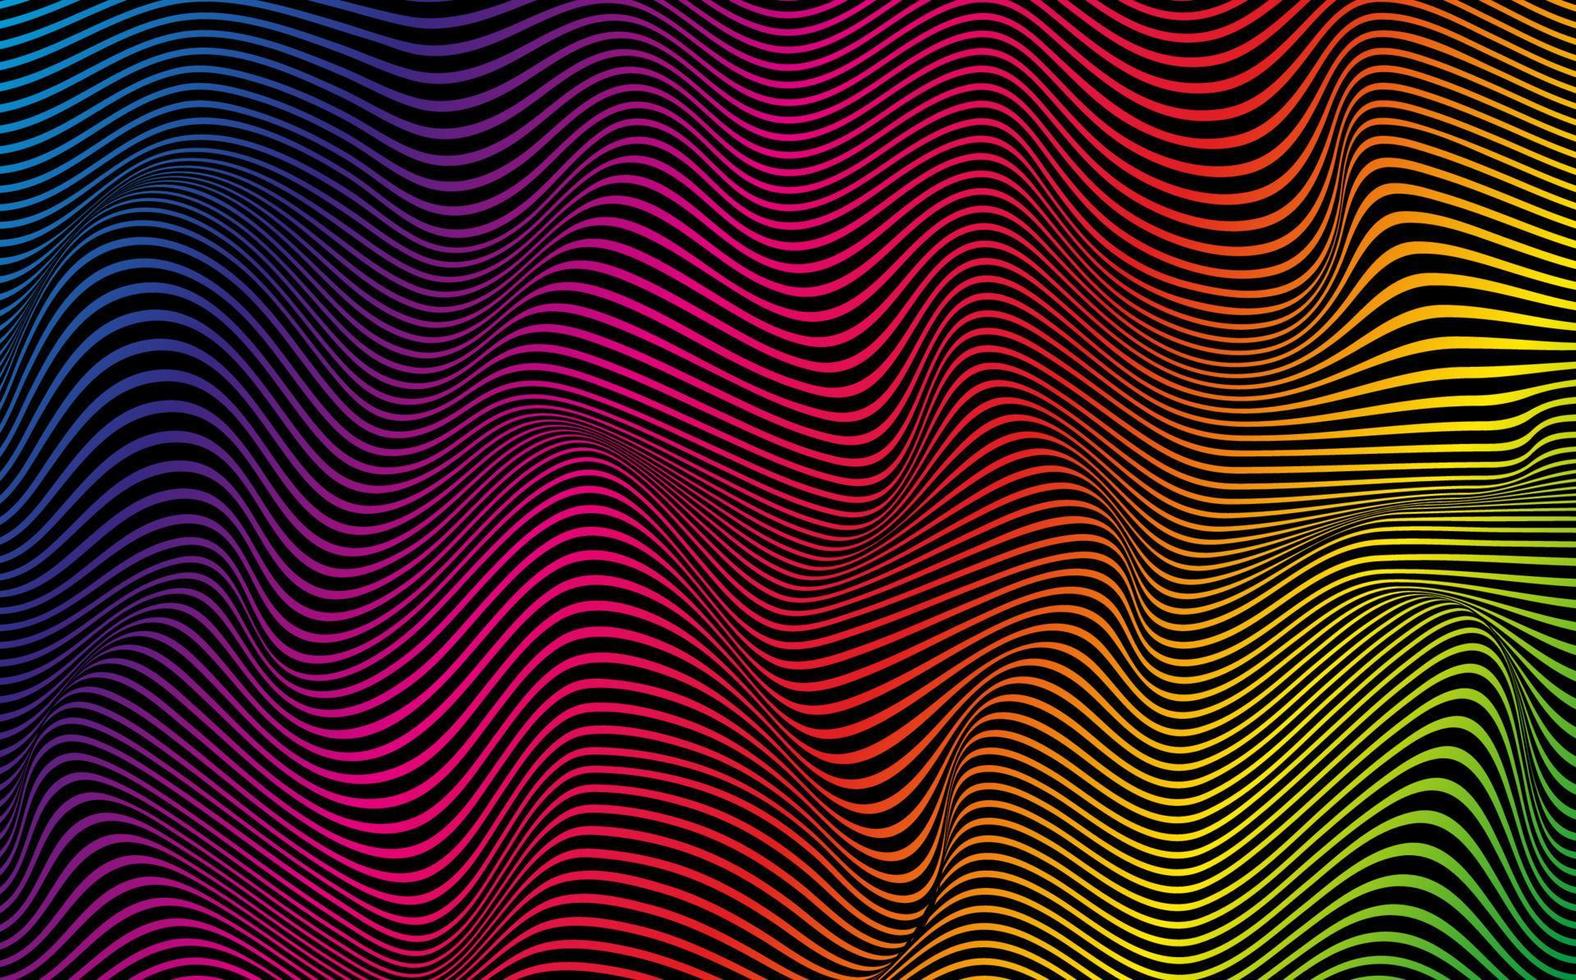 Psychedelic lines. Abstract pattern. Texture with wavy, curves stripes. Optical art background. Wave colorful gradient design,  Vector illustration hypnotic multicolors template